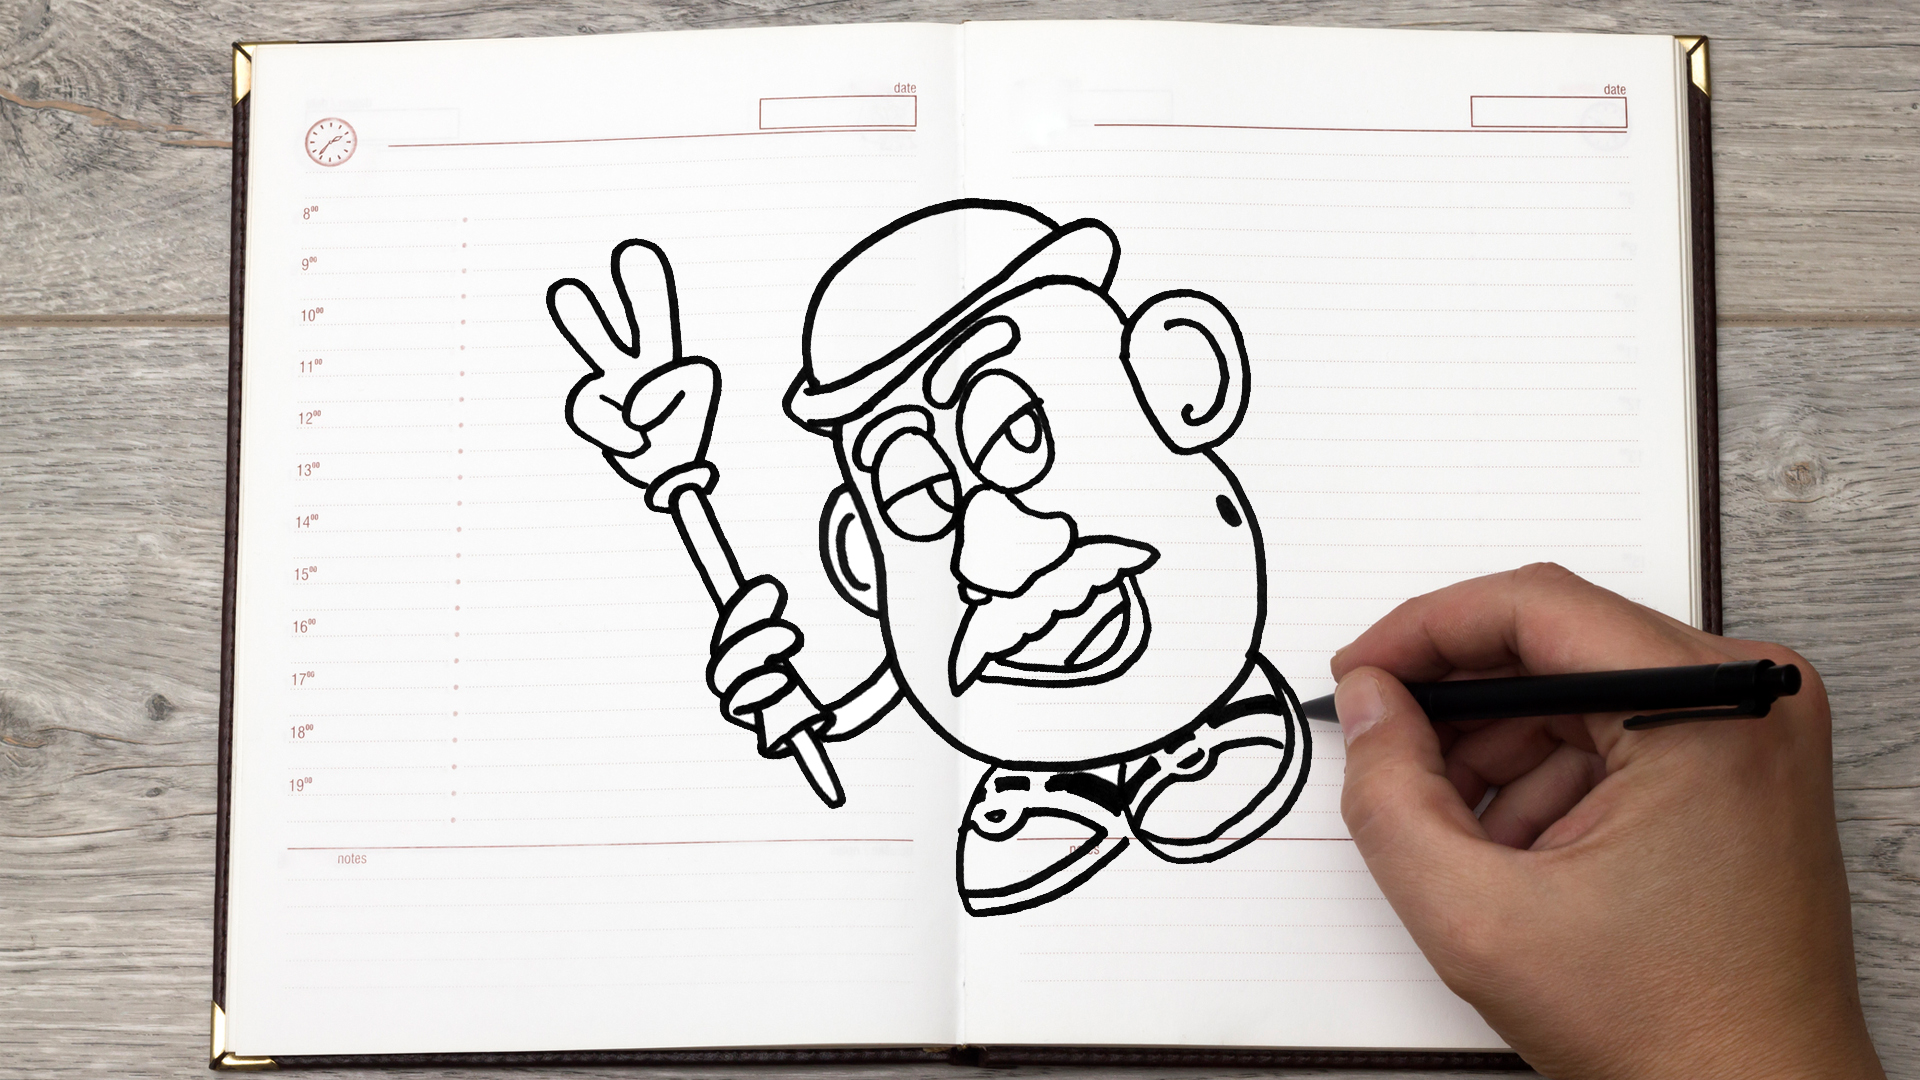 A doodle of Mr. Potato Head in a diary